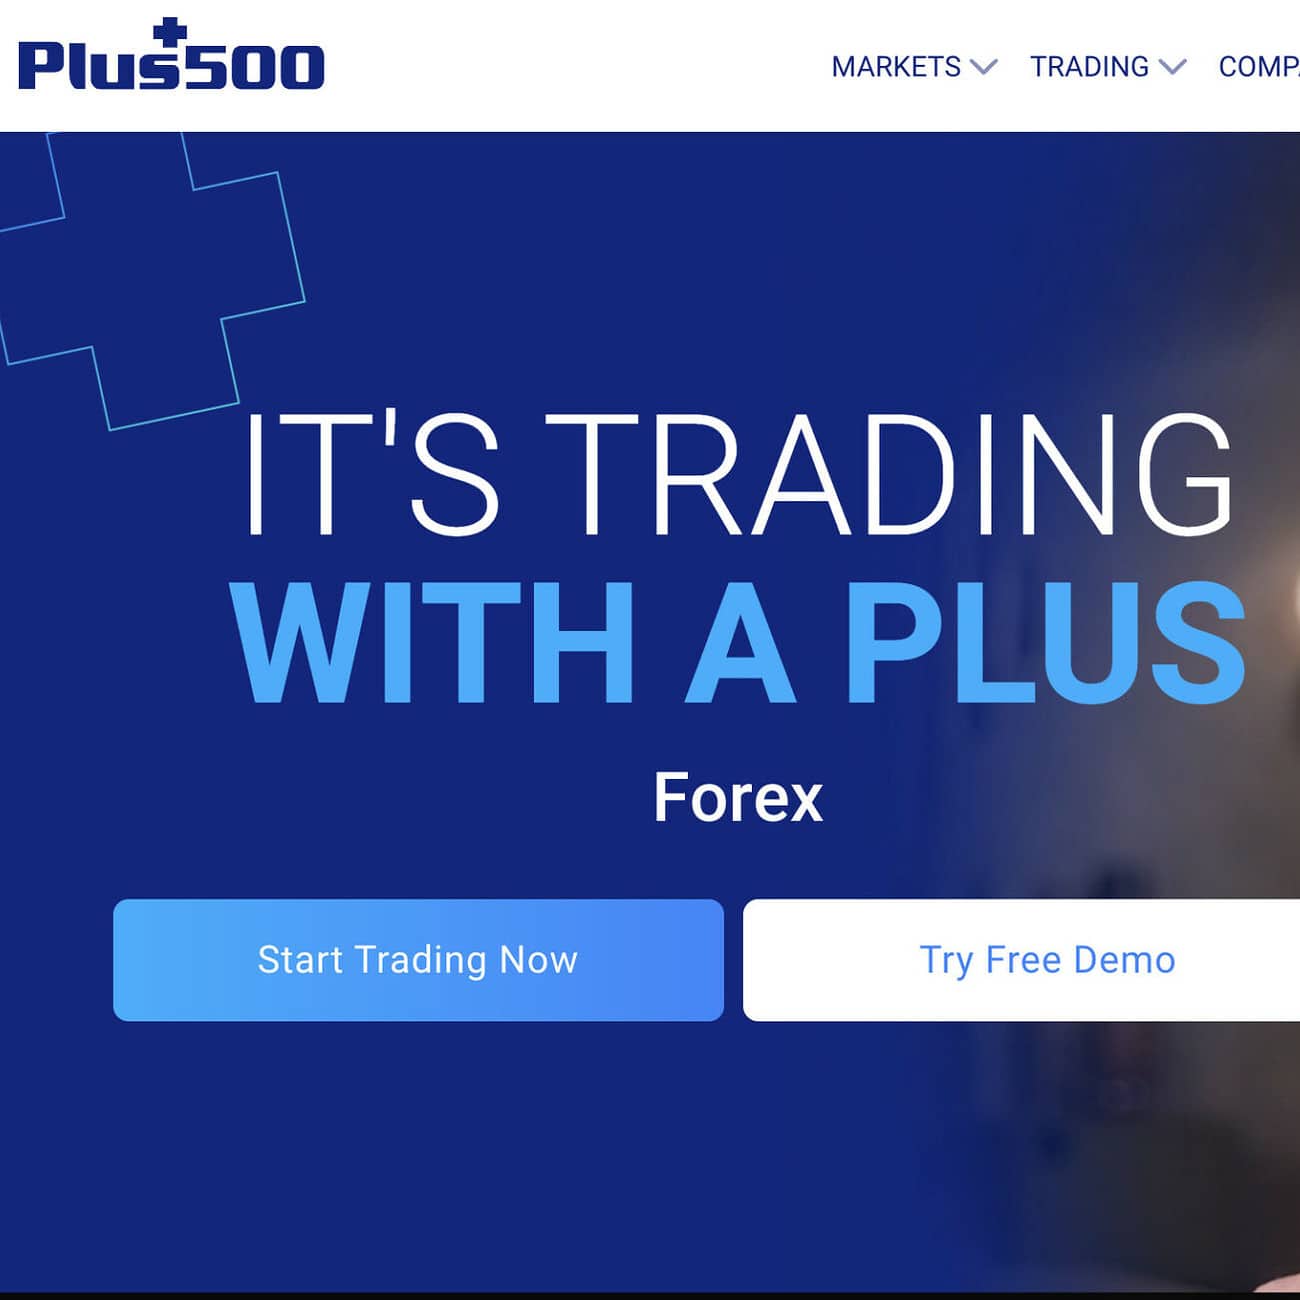 ᐅ Plus Review - Scam or Safe? Rating and Reviews for 